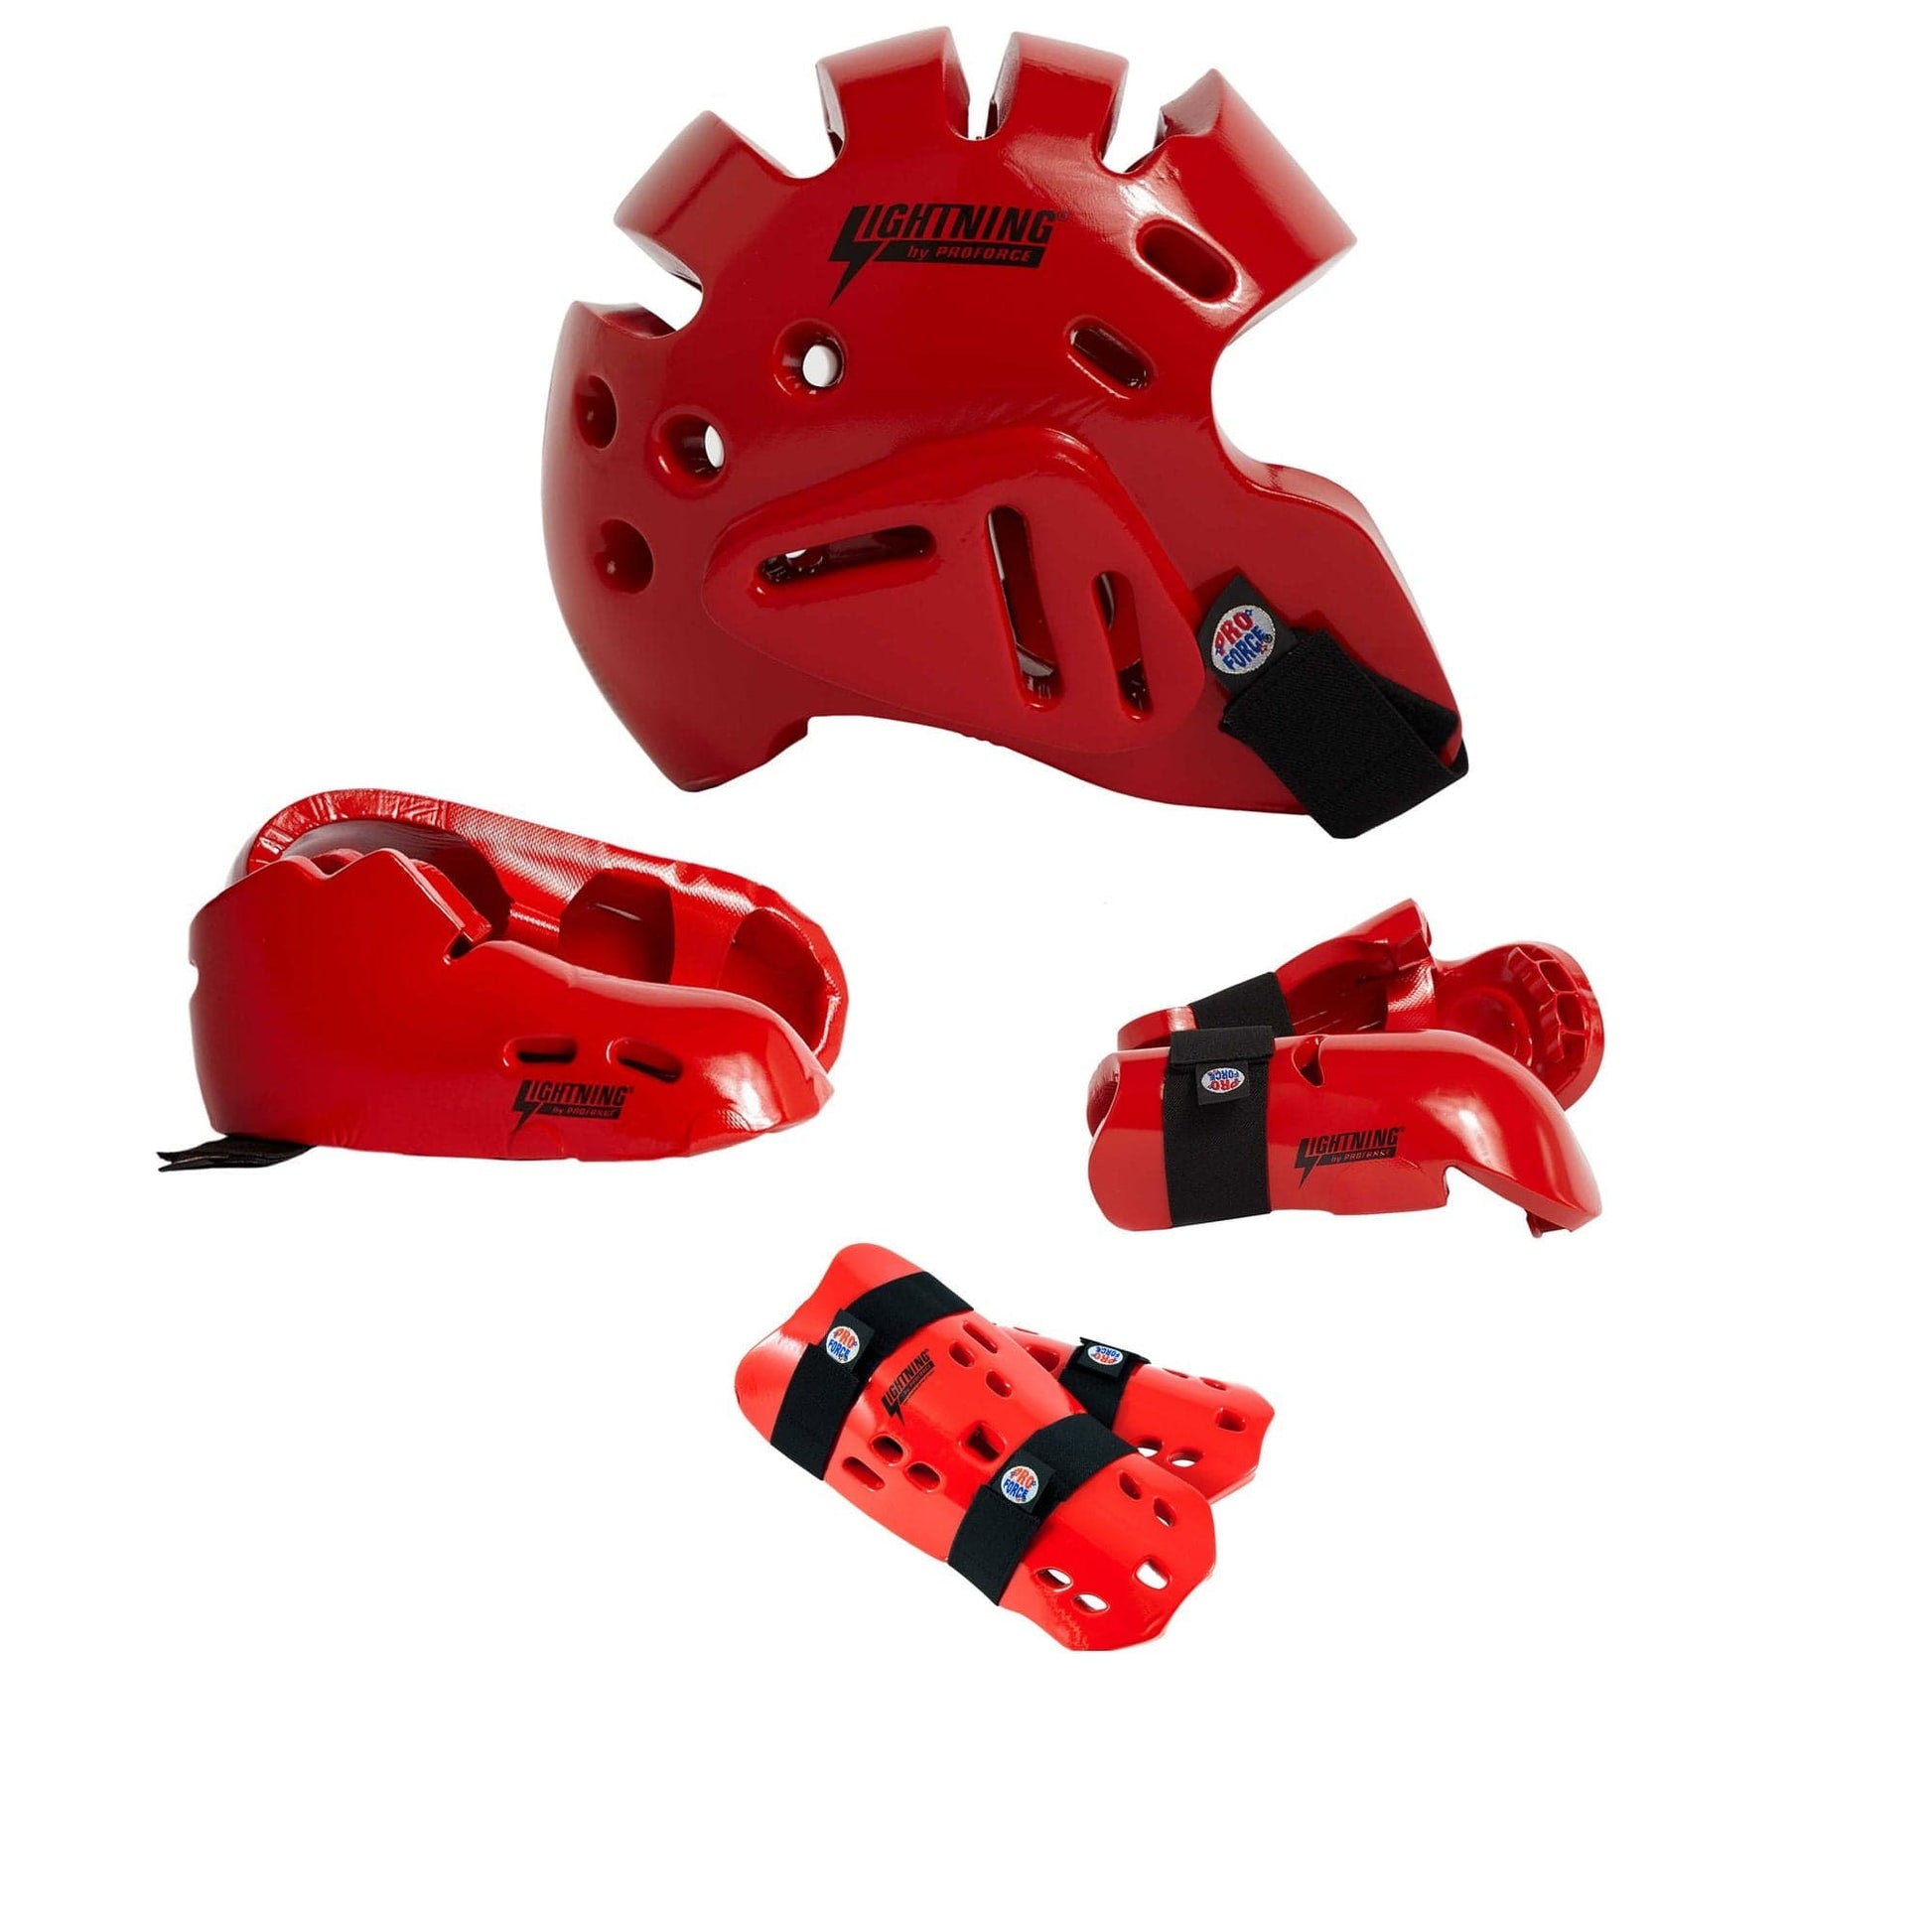 ProForce sporting goods ch xs/12-13 / Small ProForce Lighting 7 Piece Sparring Gear Combo Set RED